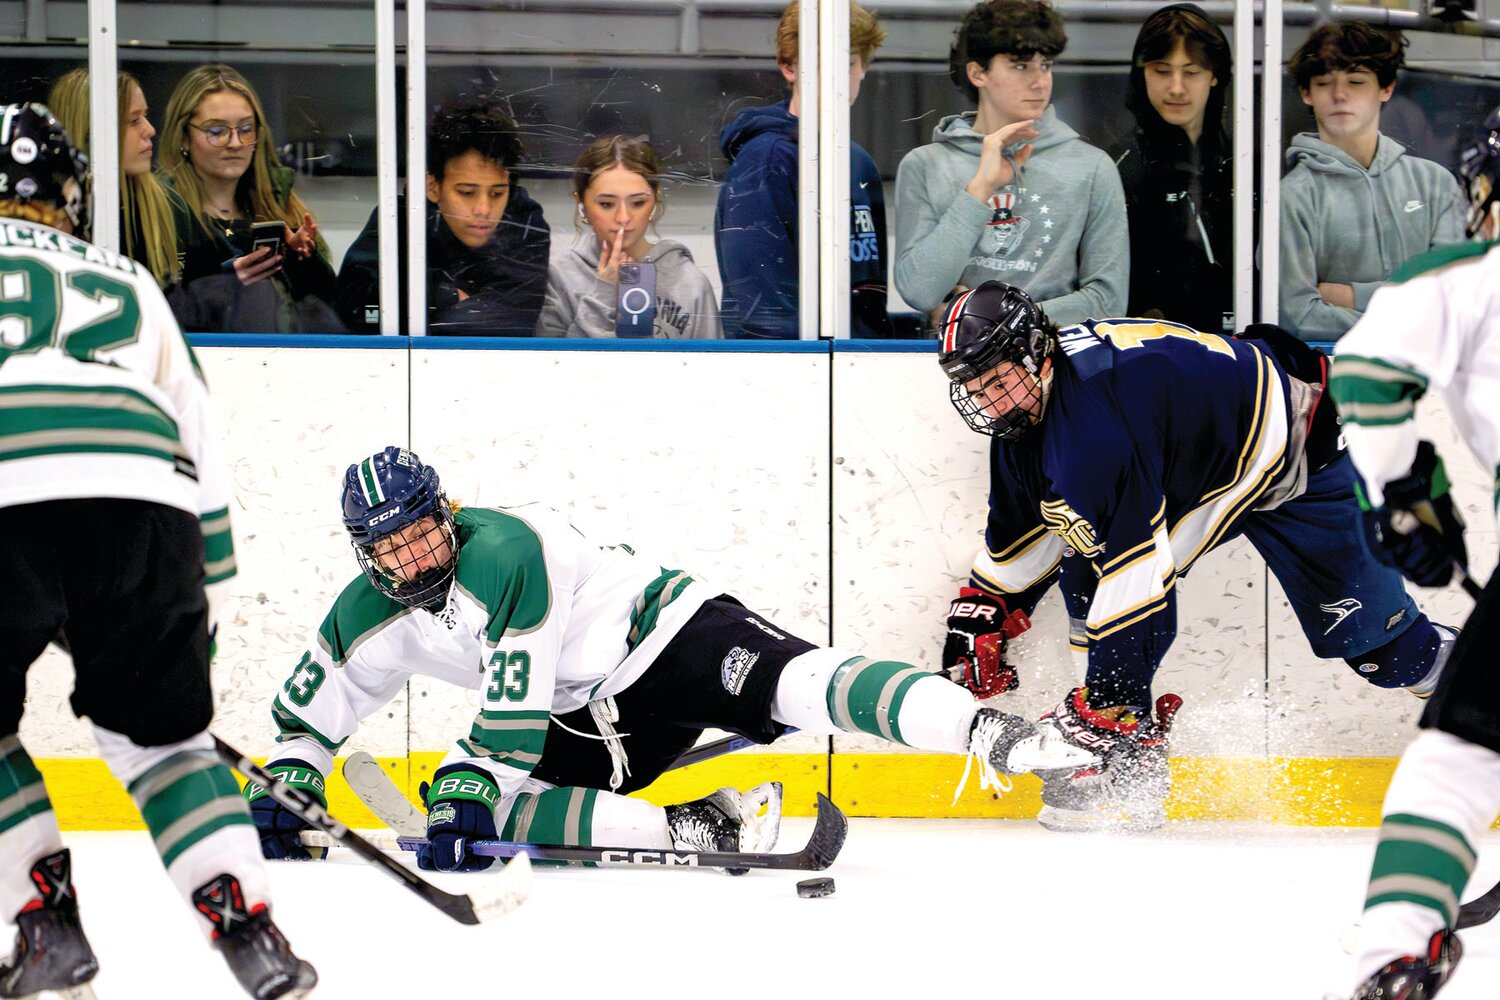 Pennridge’s Josh Kelly gets taken down in the corner by Council Rock South’s Jake Weiner as he tries to make a pass during the Suburban High School Hockey League final.